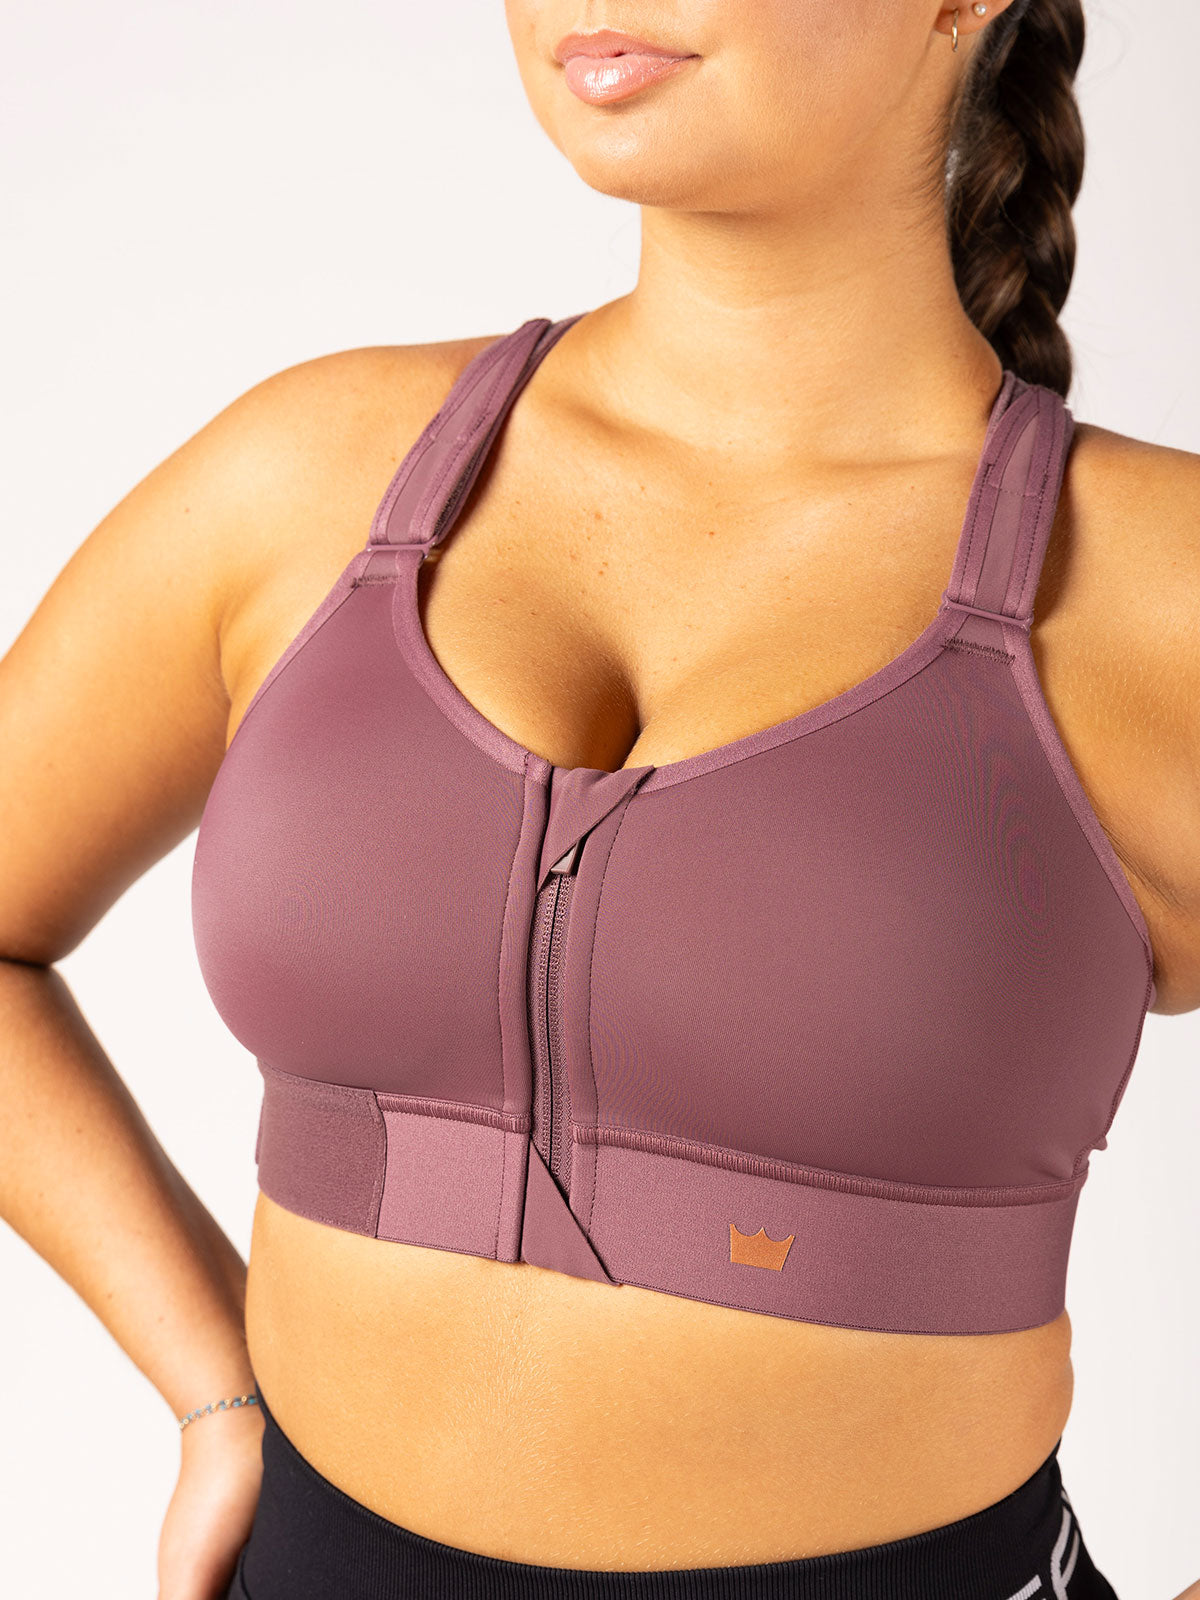 SHEFIT FLEX SPORTS BRA TRY-ON, TEST, AND HONEST REVIEW 